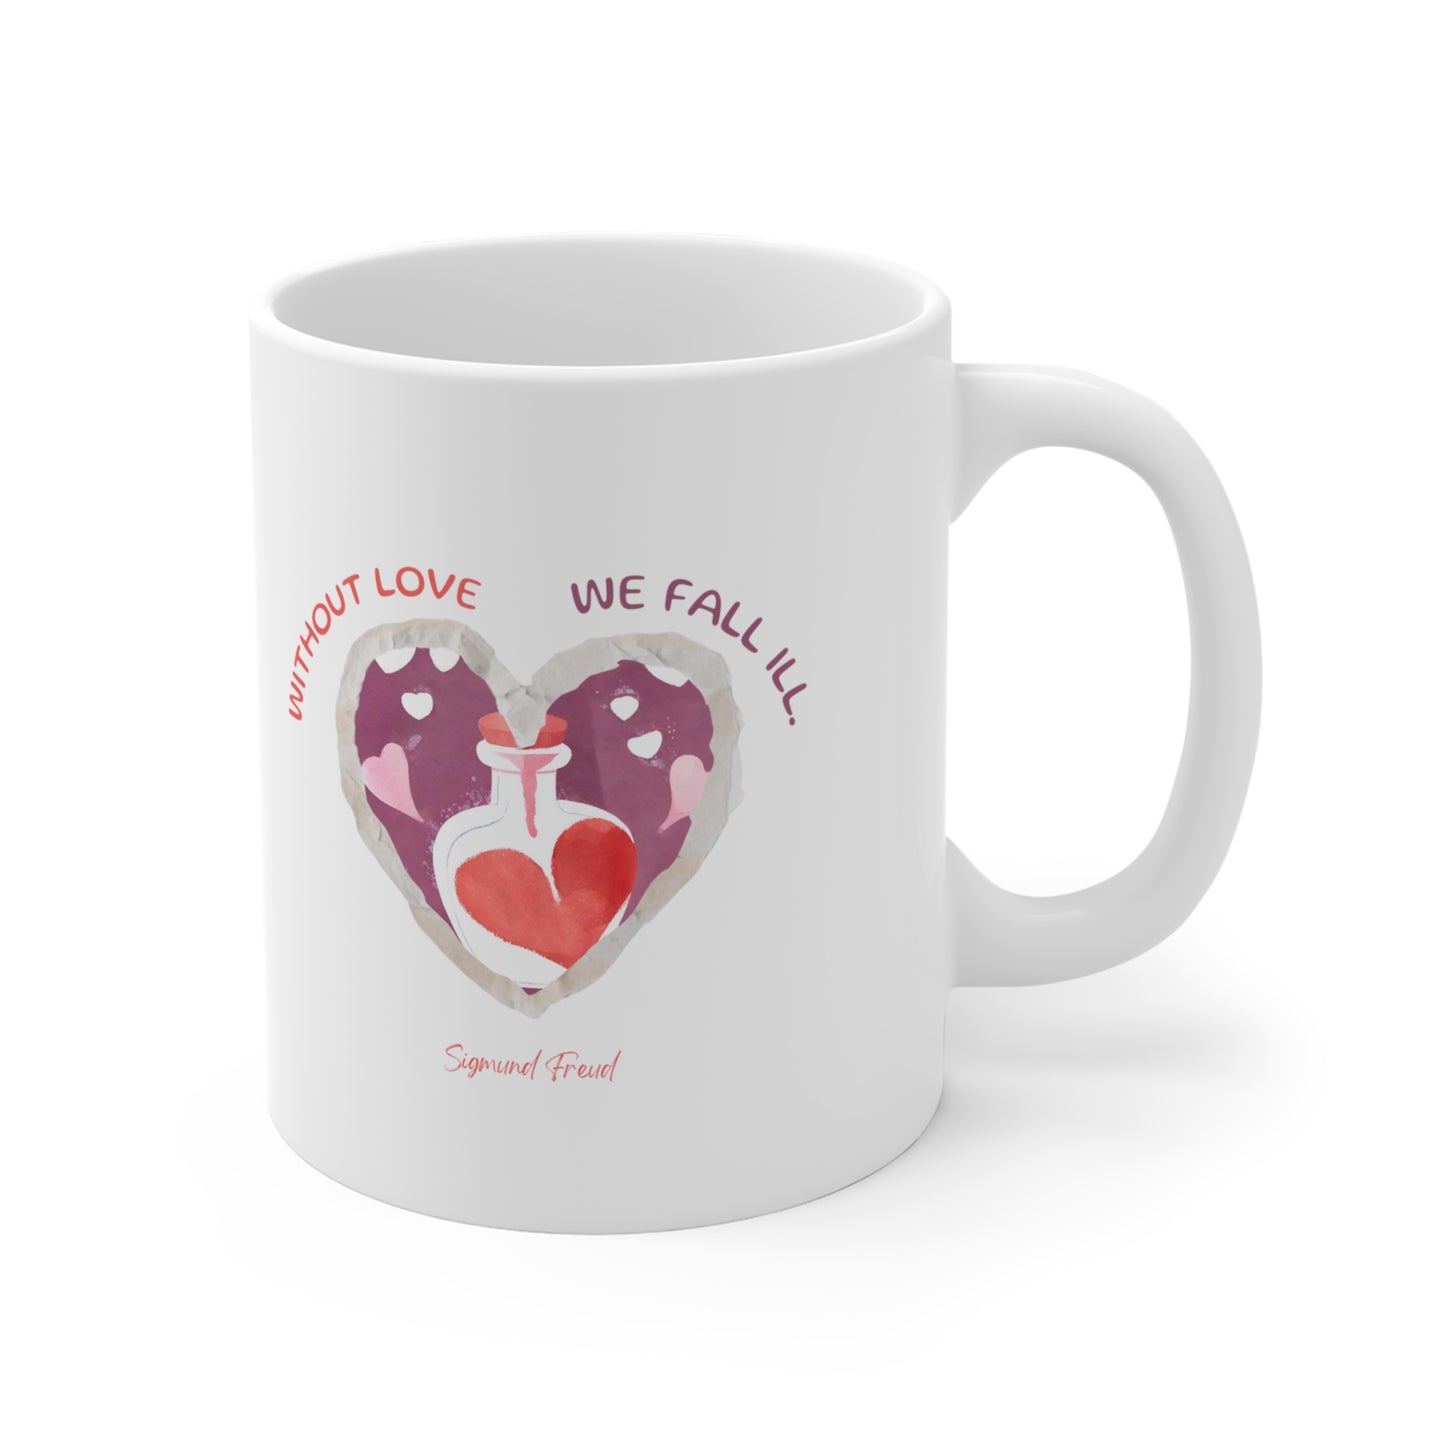 The Love is Essential Mug: Spread Love, Stay Healthy"Without love we fall ill" AEN0205